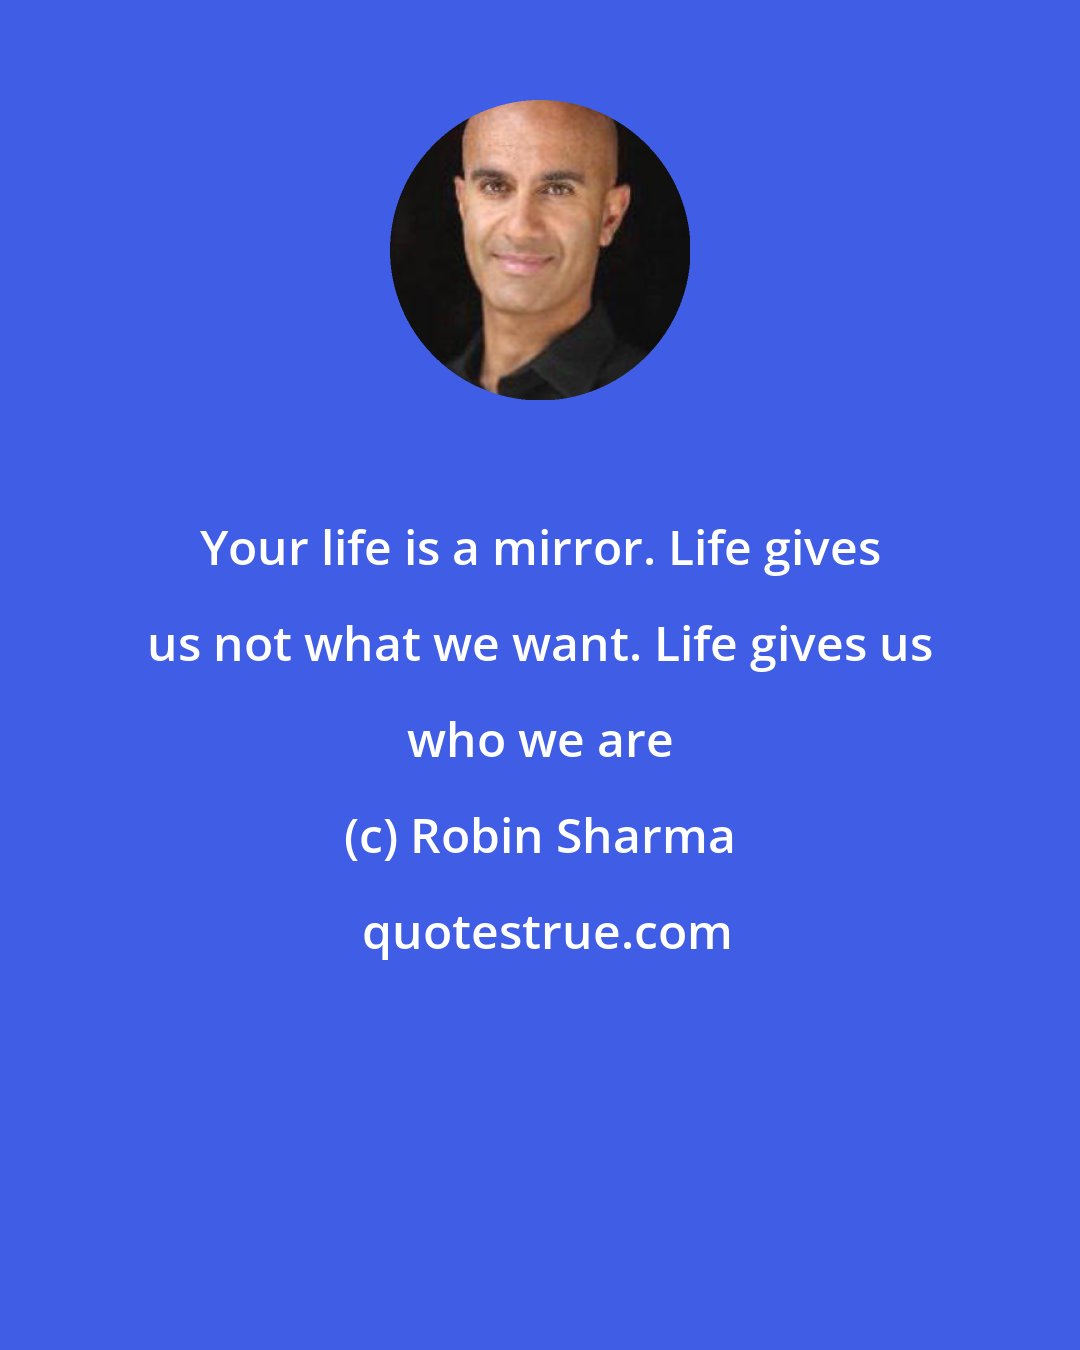 Robin Sharma: Your life is a mirror. Life gives us not what we want. Life gives us who we are